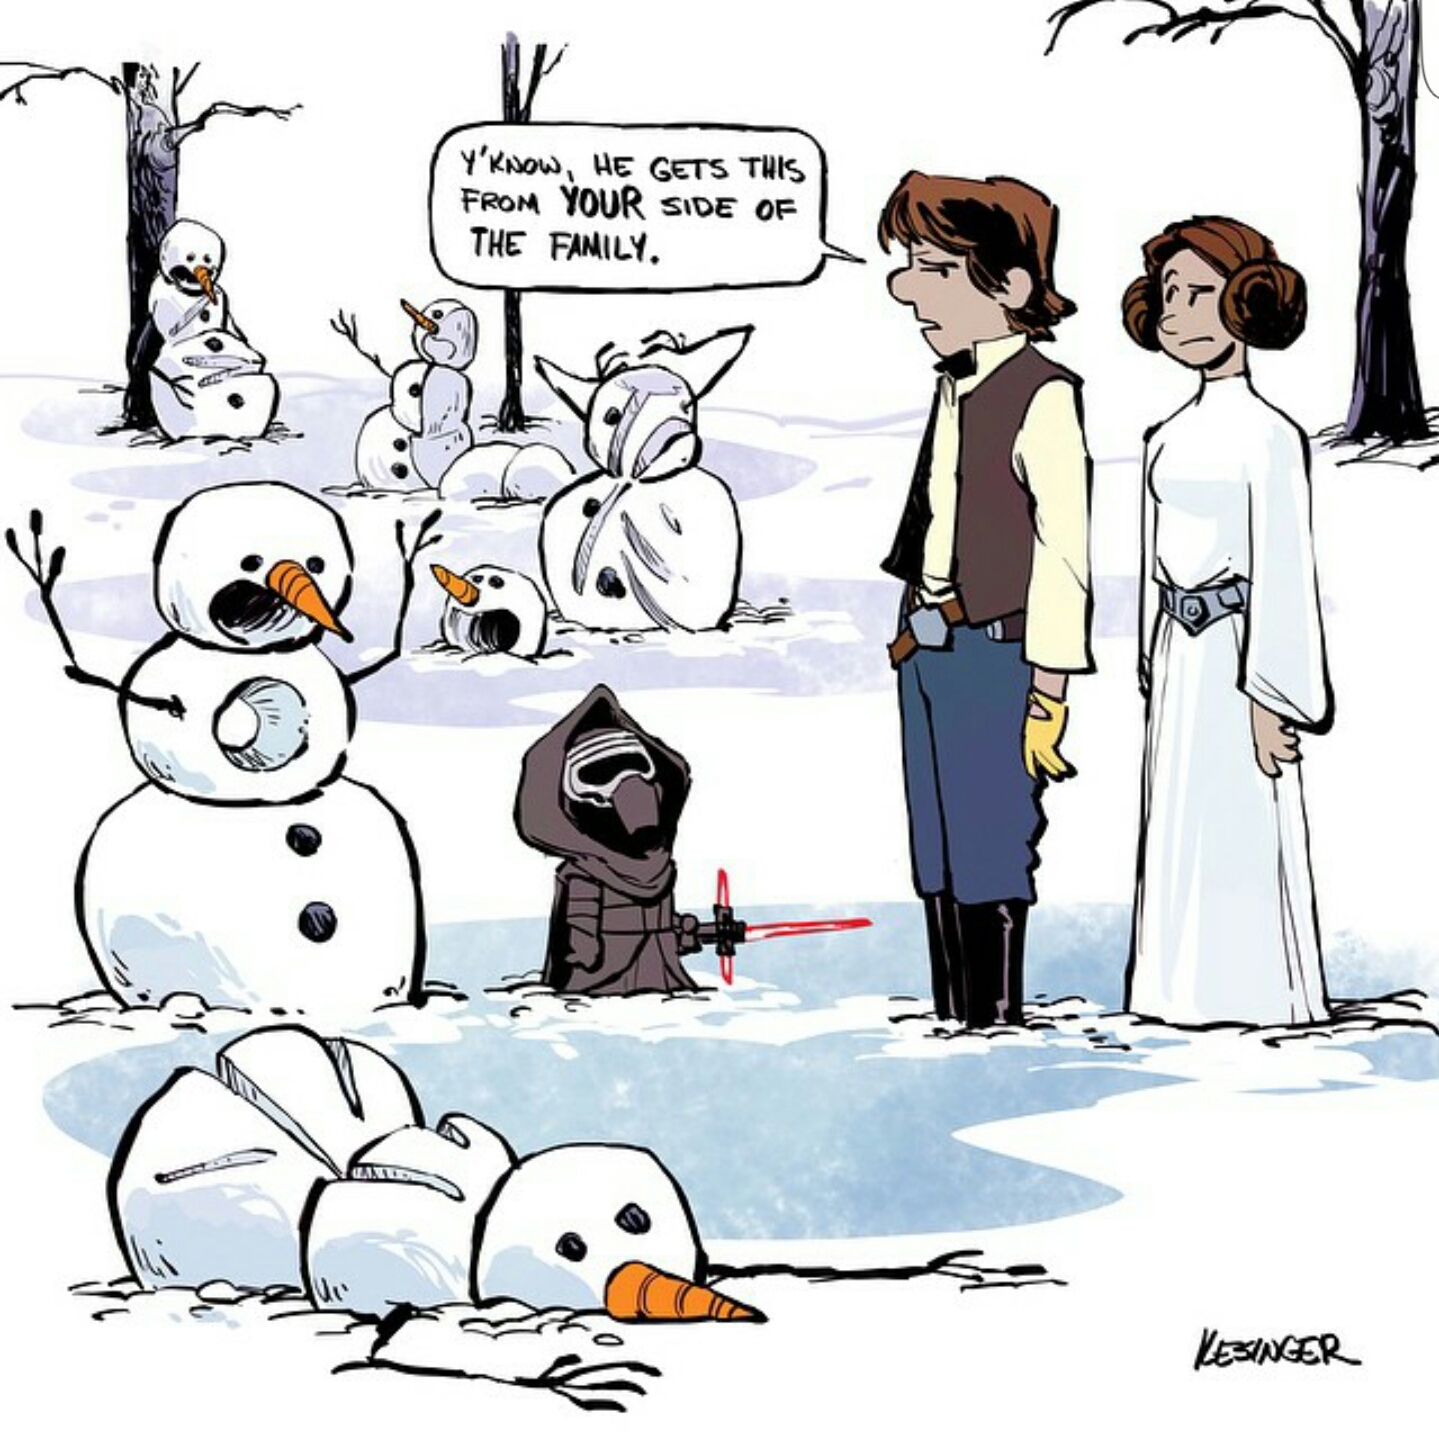 star wars calvin and hobbes - Y'know, He Gets This From Your Side Of The Fanily. Vesinger